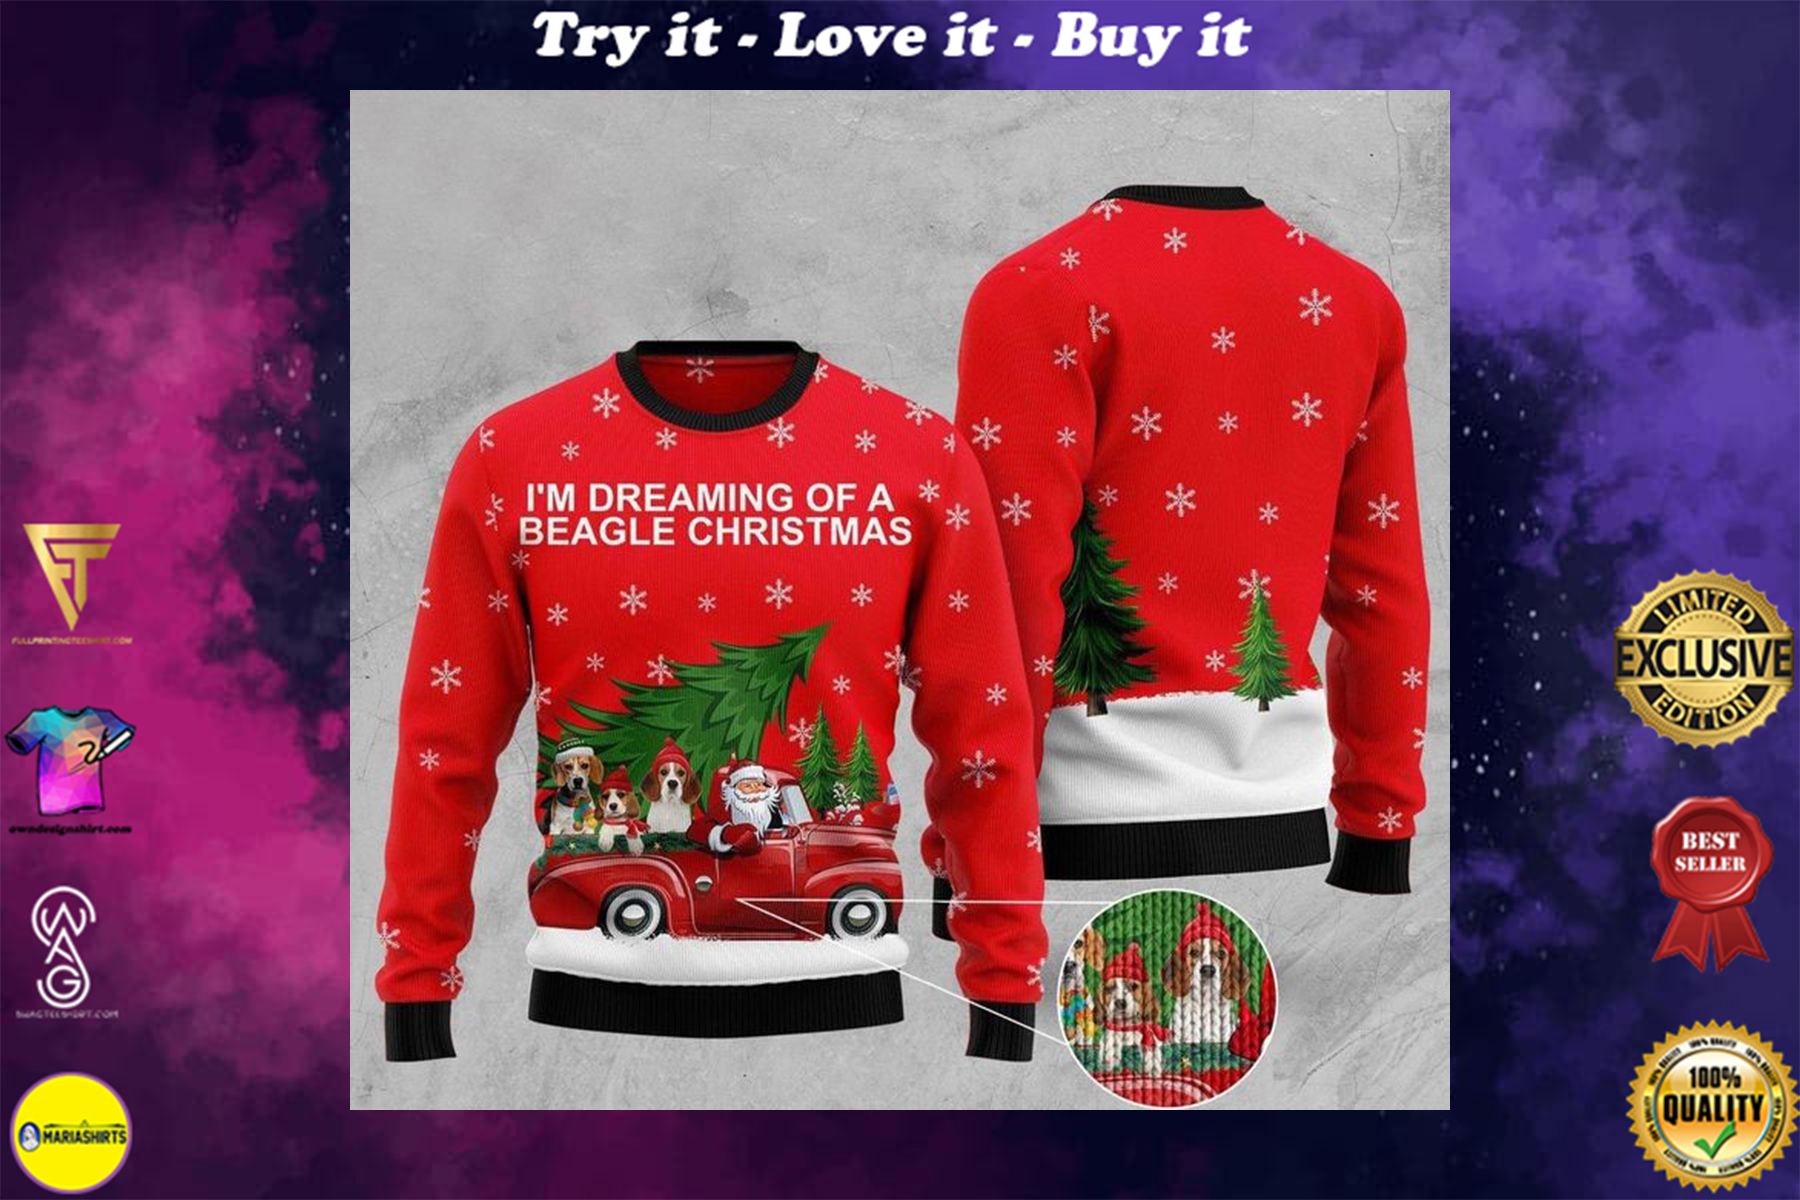 im dreaming of a beagle christmas full printing ugly sweater